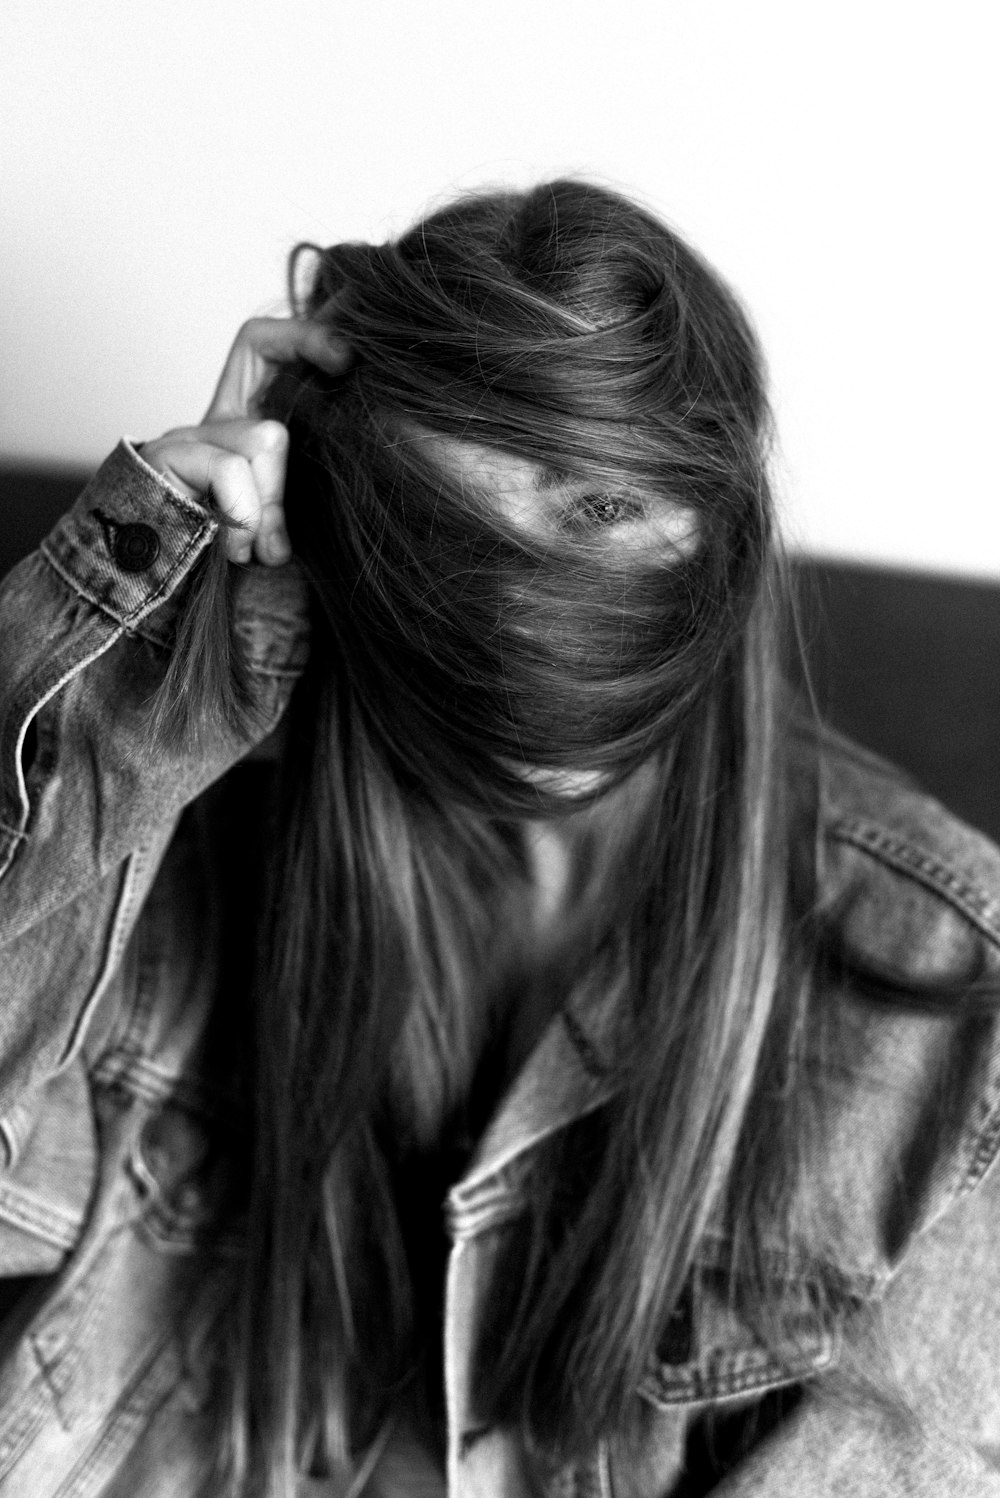 woman in denim jacket covering her face with her hair